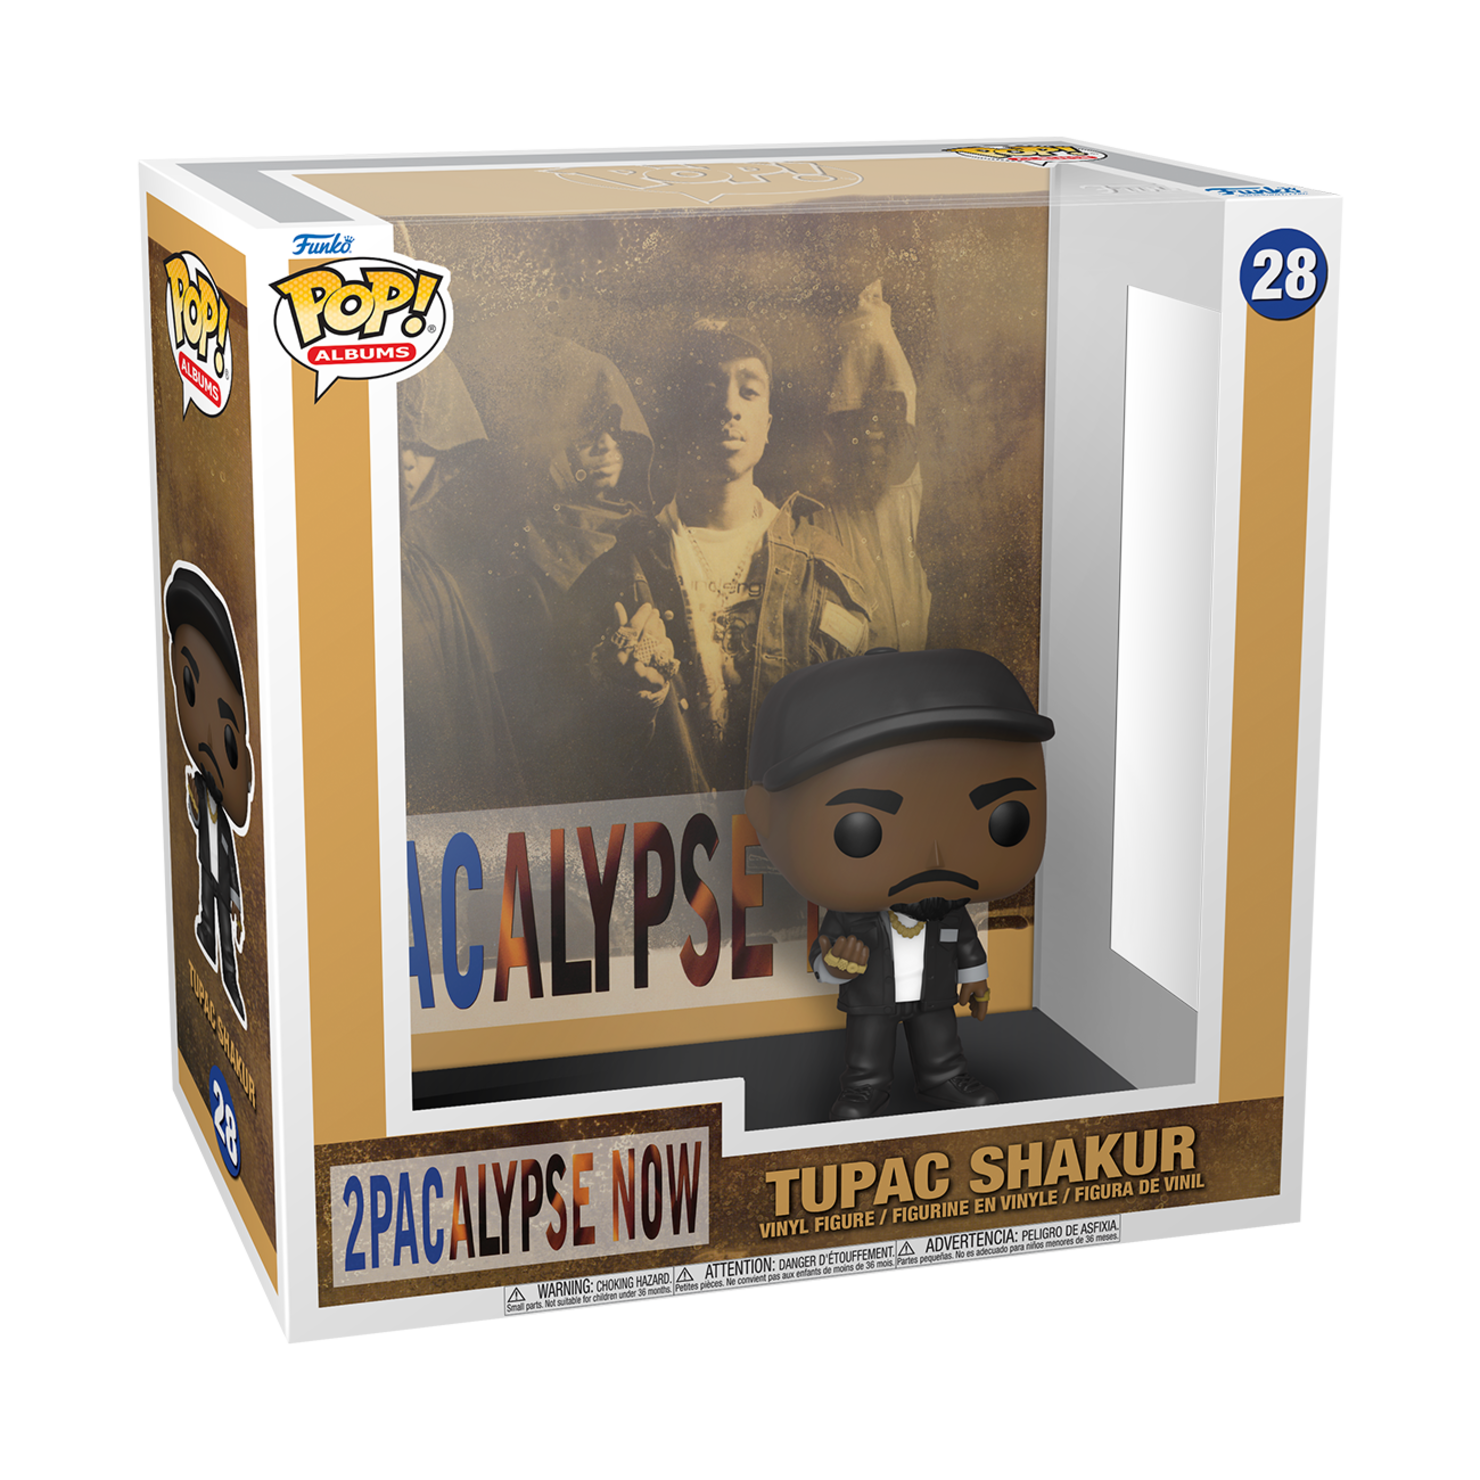 Funko Reveals Its Newest Pop! Album Inspired By Tupac Shakur's Debut Album